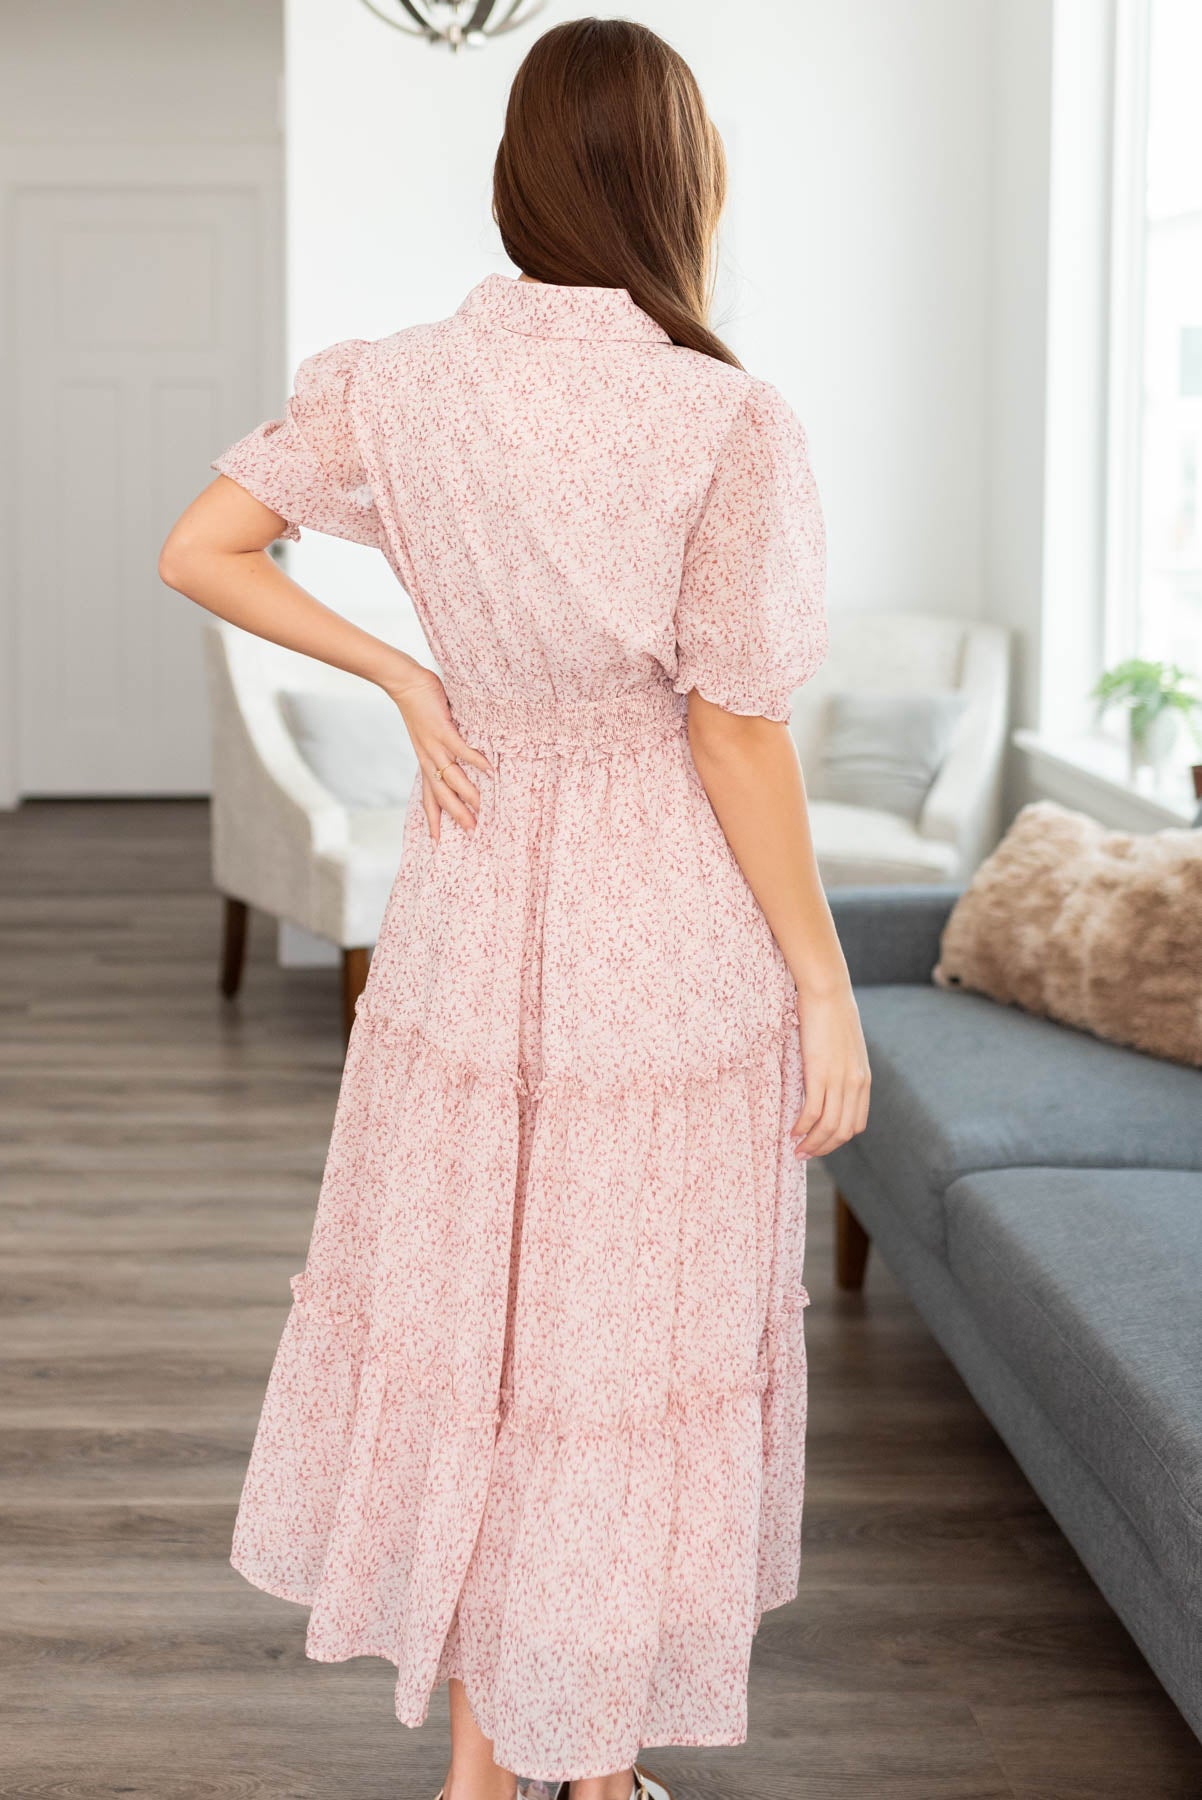 Back view of the dusty blush collared dress